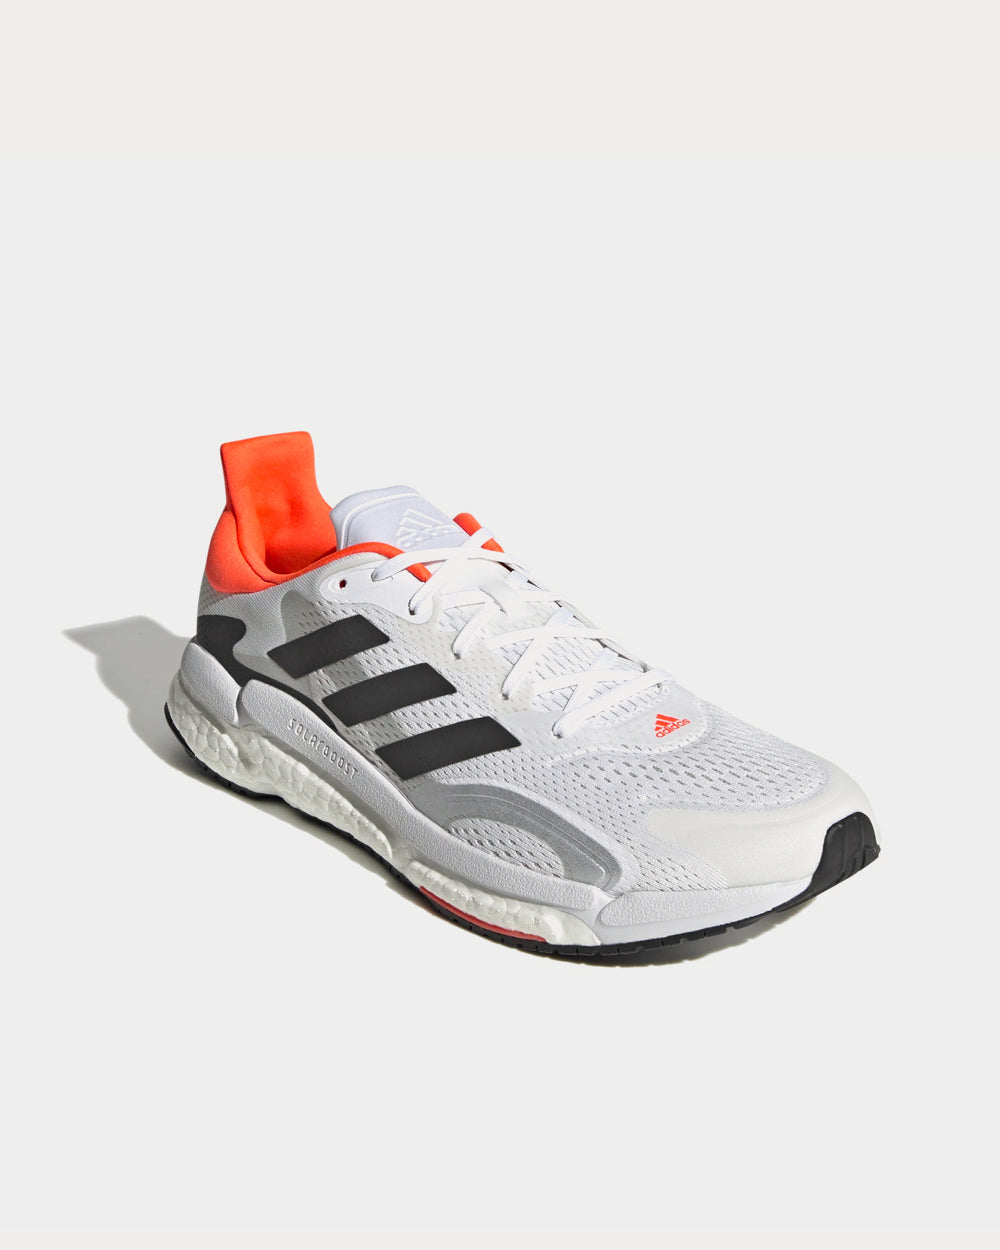 Adidas - Solarboost 3 Tokyo Cloud White / Core Black / Solar Red Running Shoes